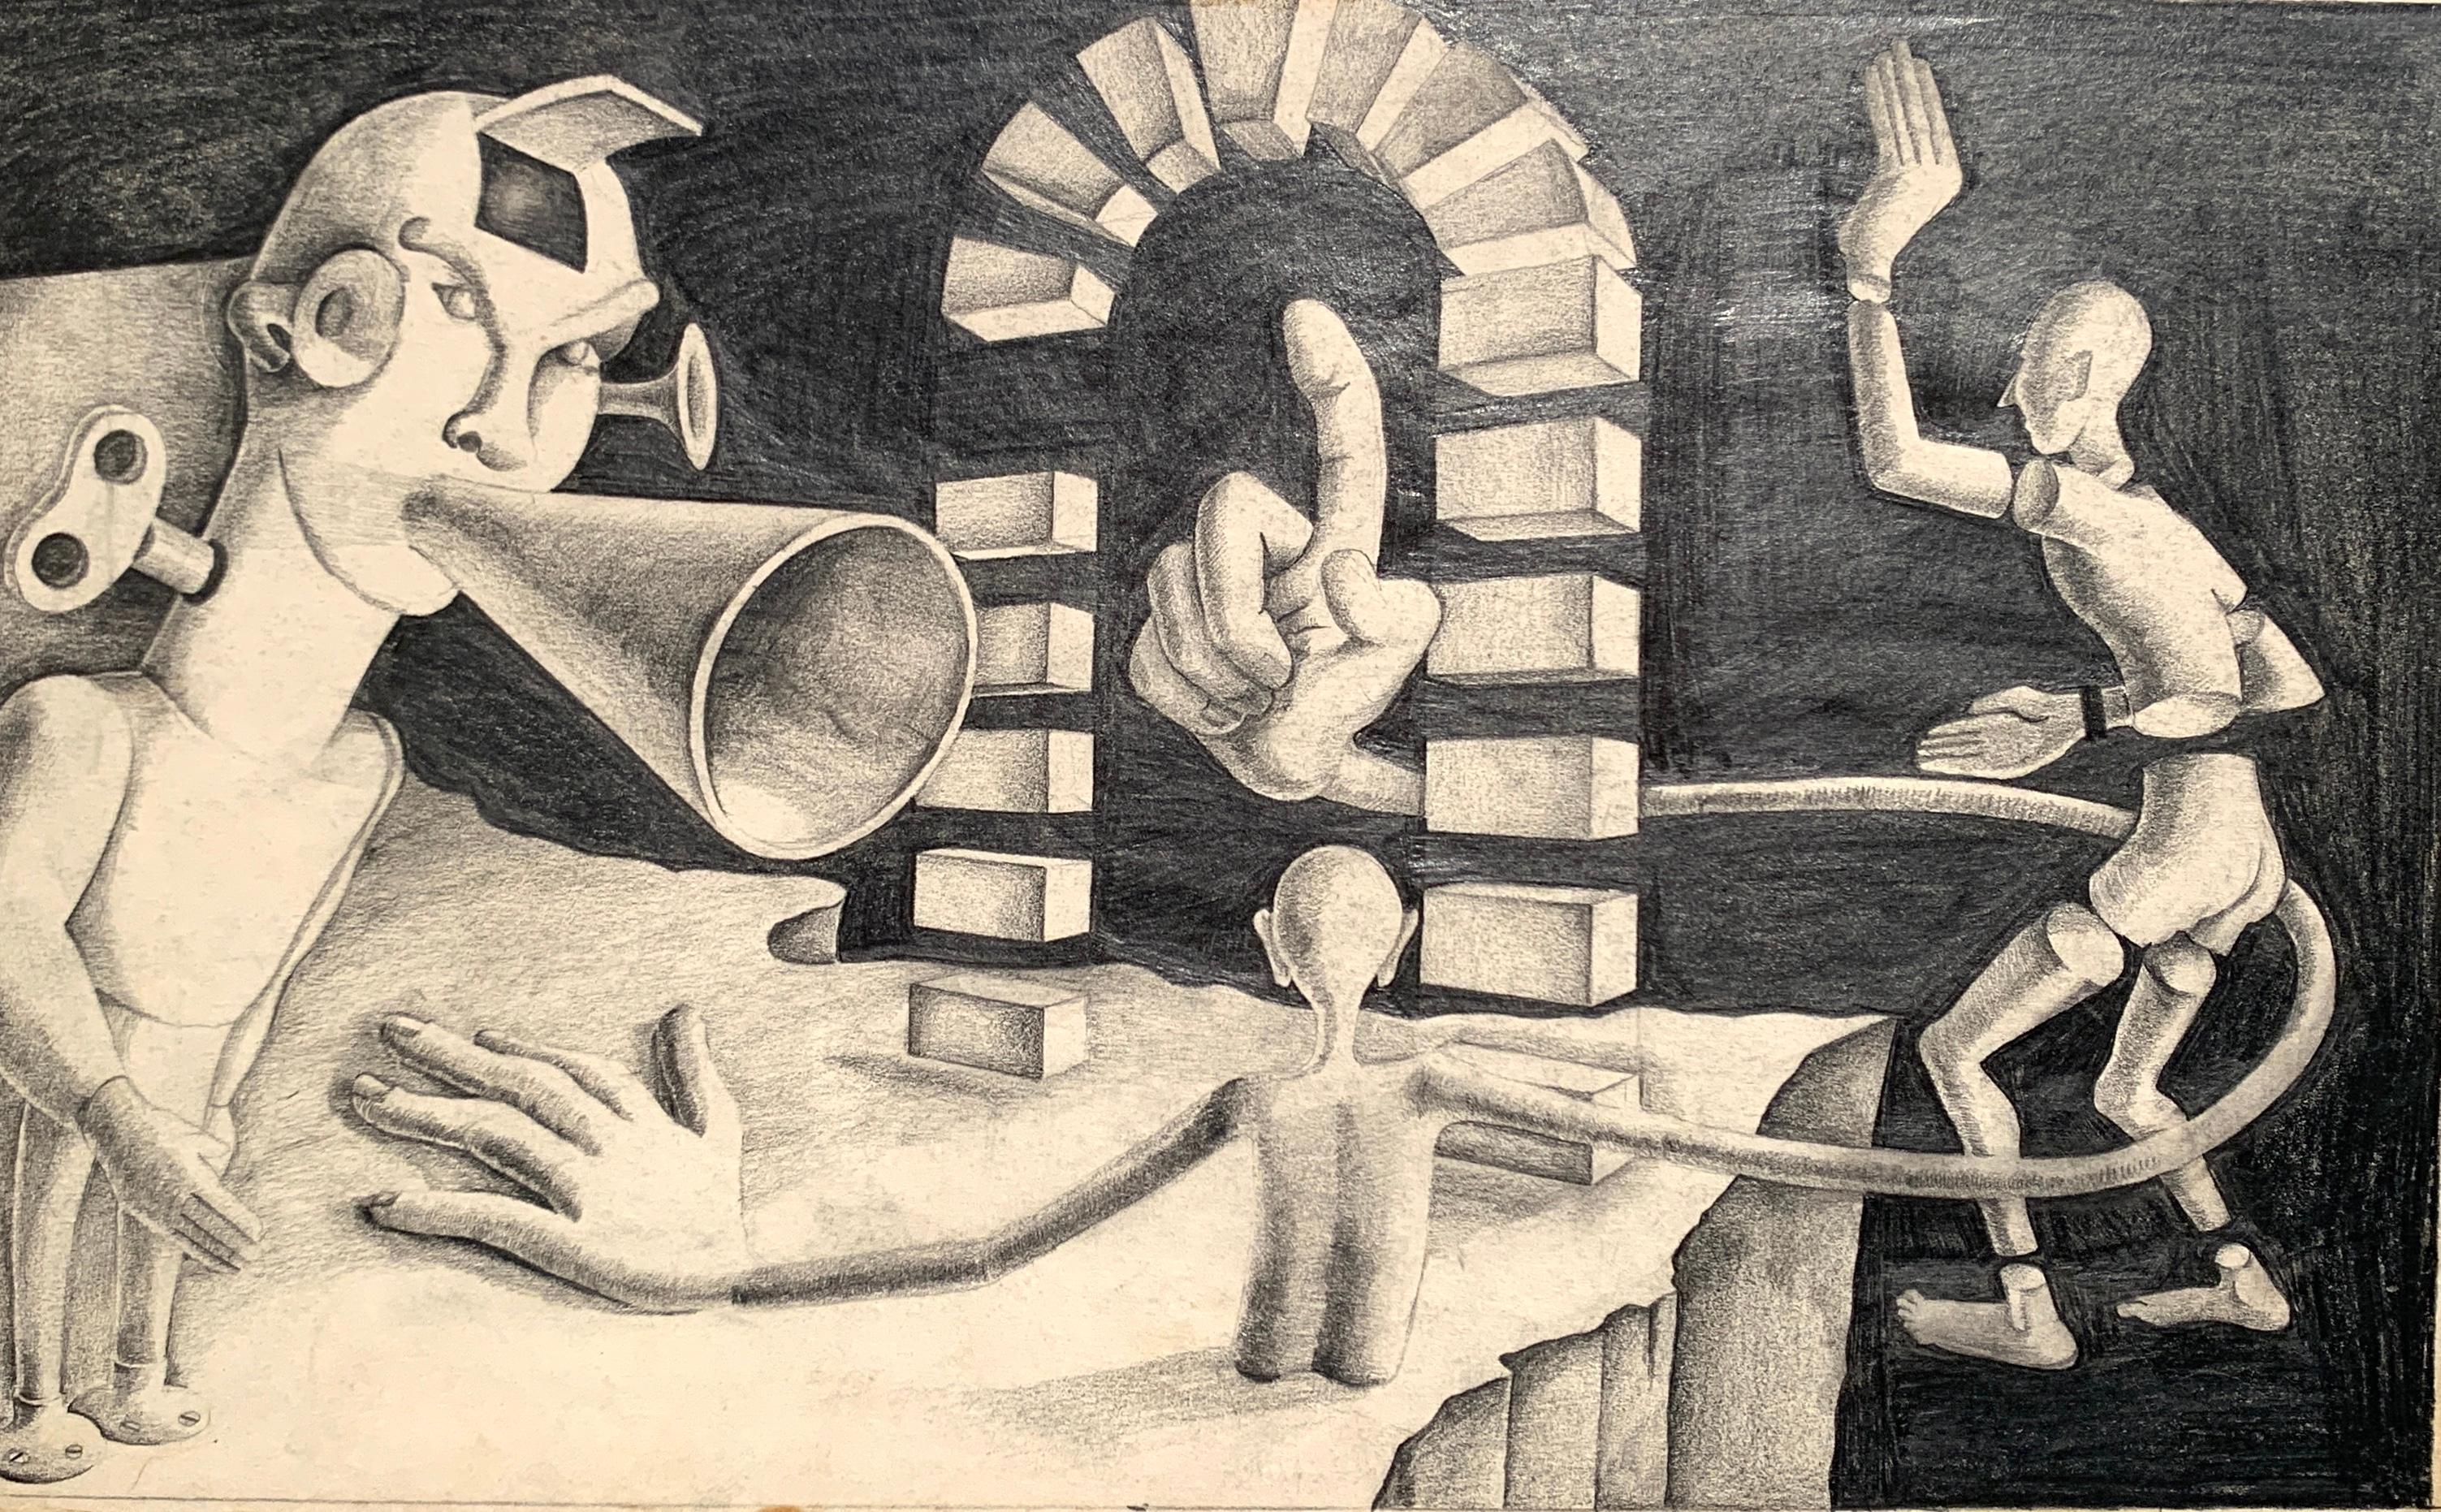 1940s "Toy Story" Charcoal and Pencil Surreal Drawing 